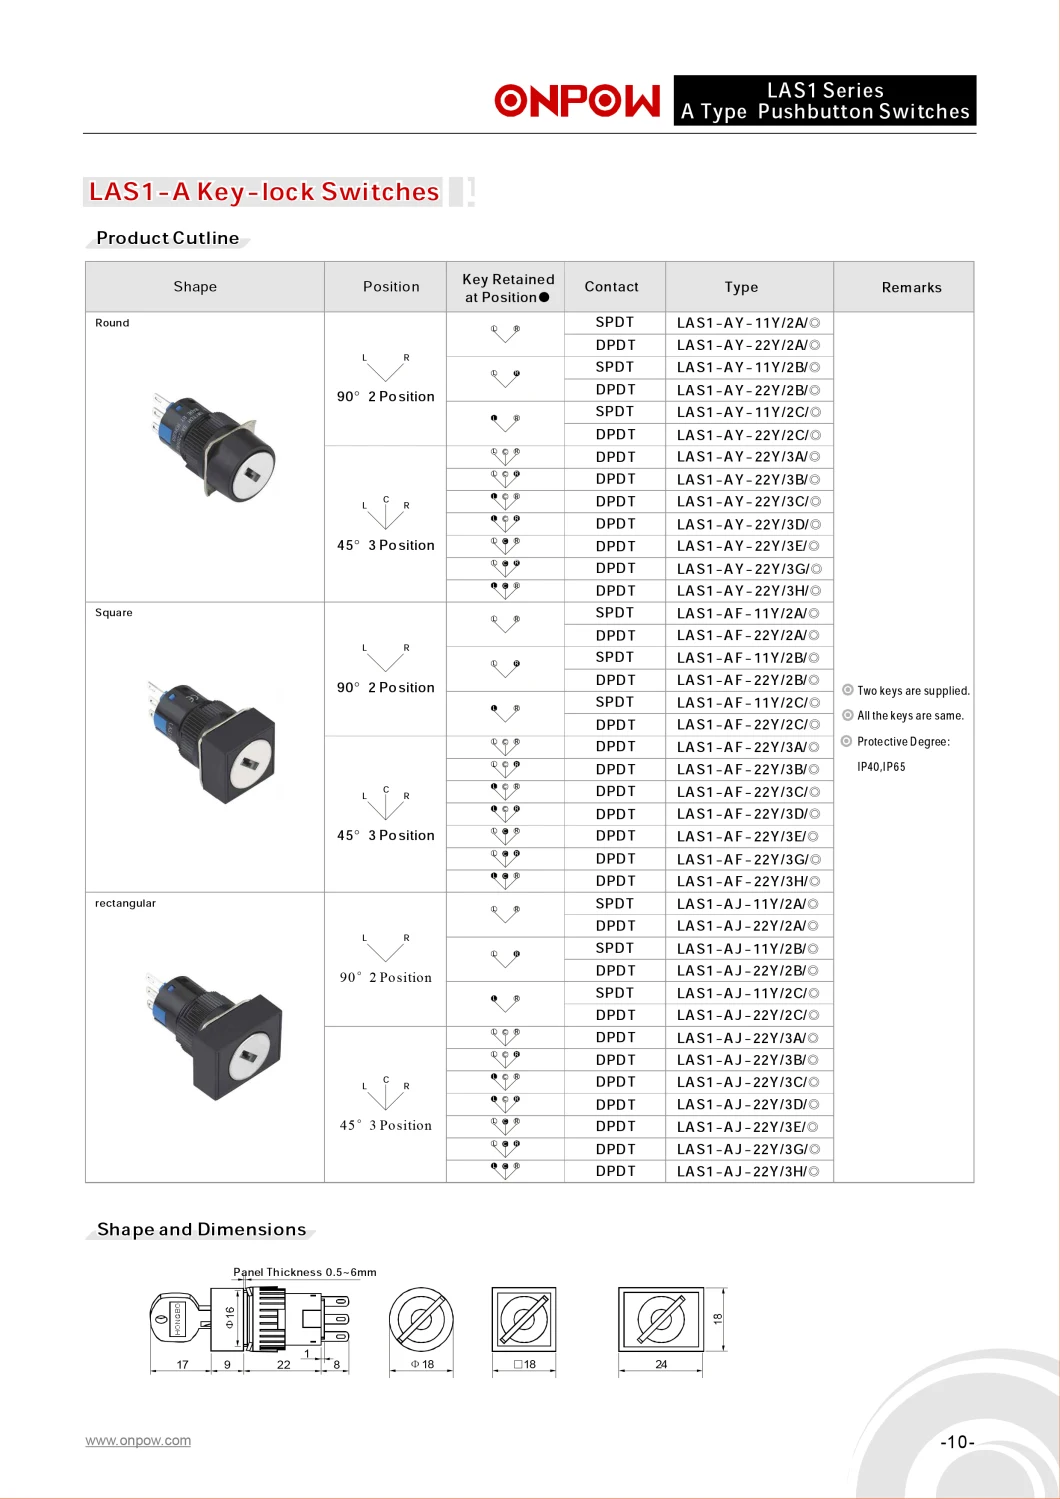 Onpow Round Push Button Switch (LAS1-AY-11/R/12V, CE, VDE, UL, RoHS)